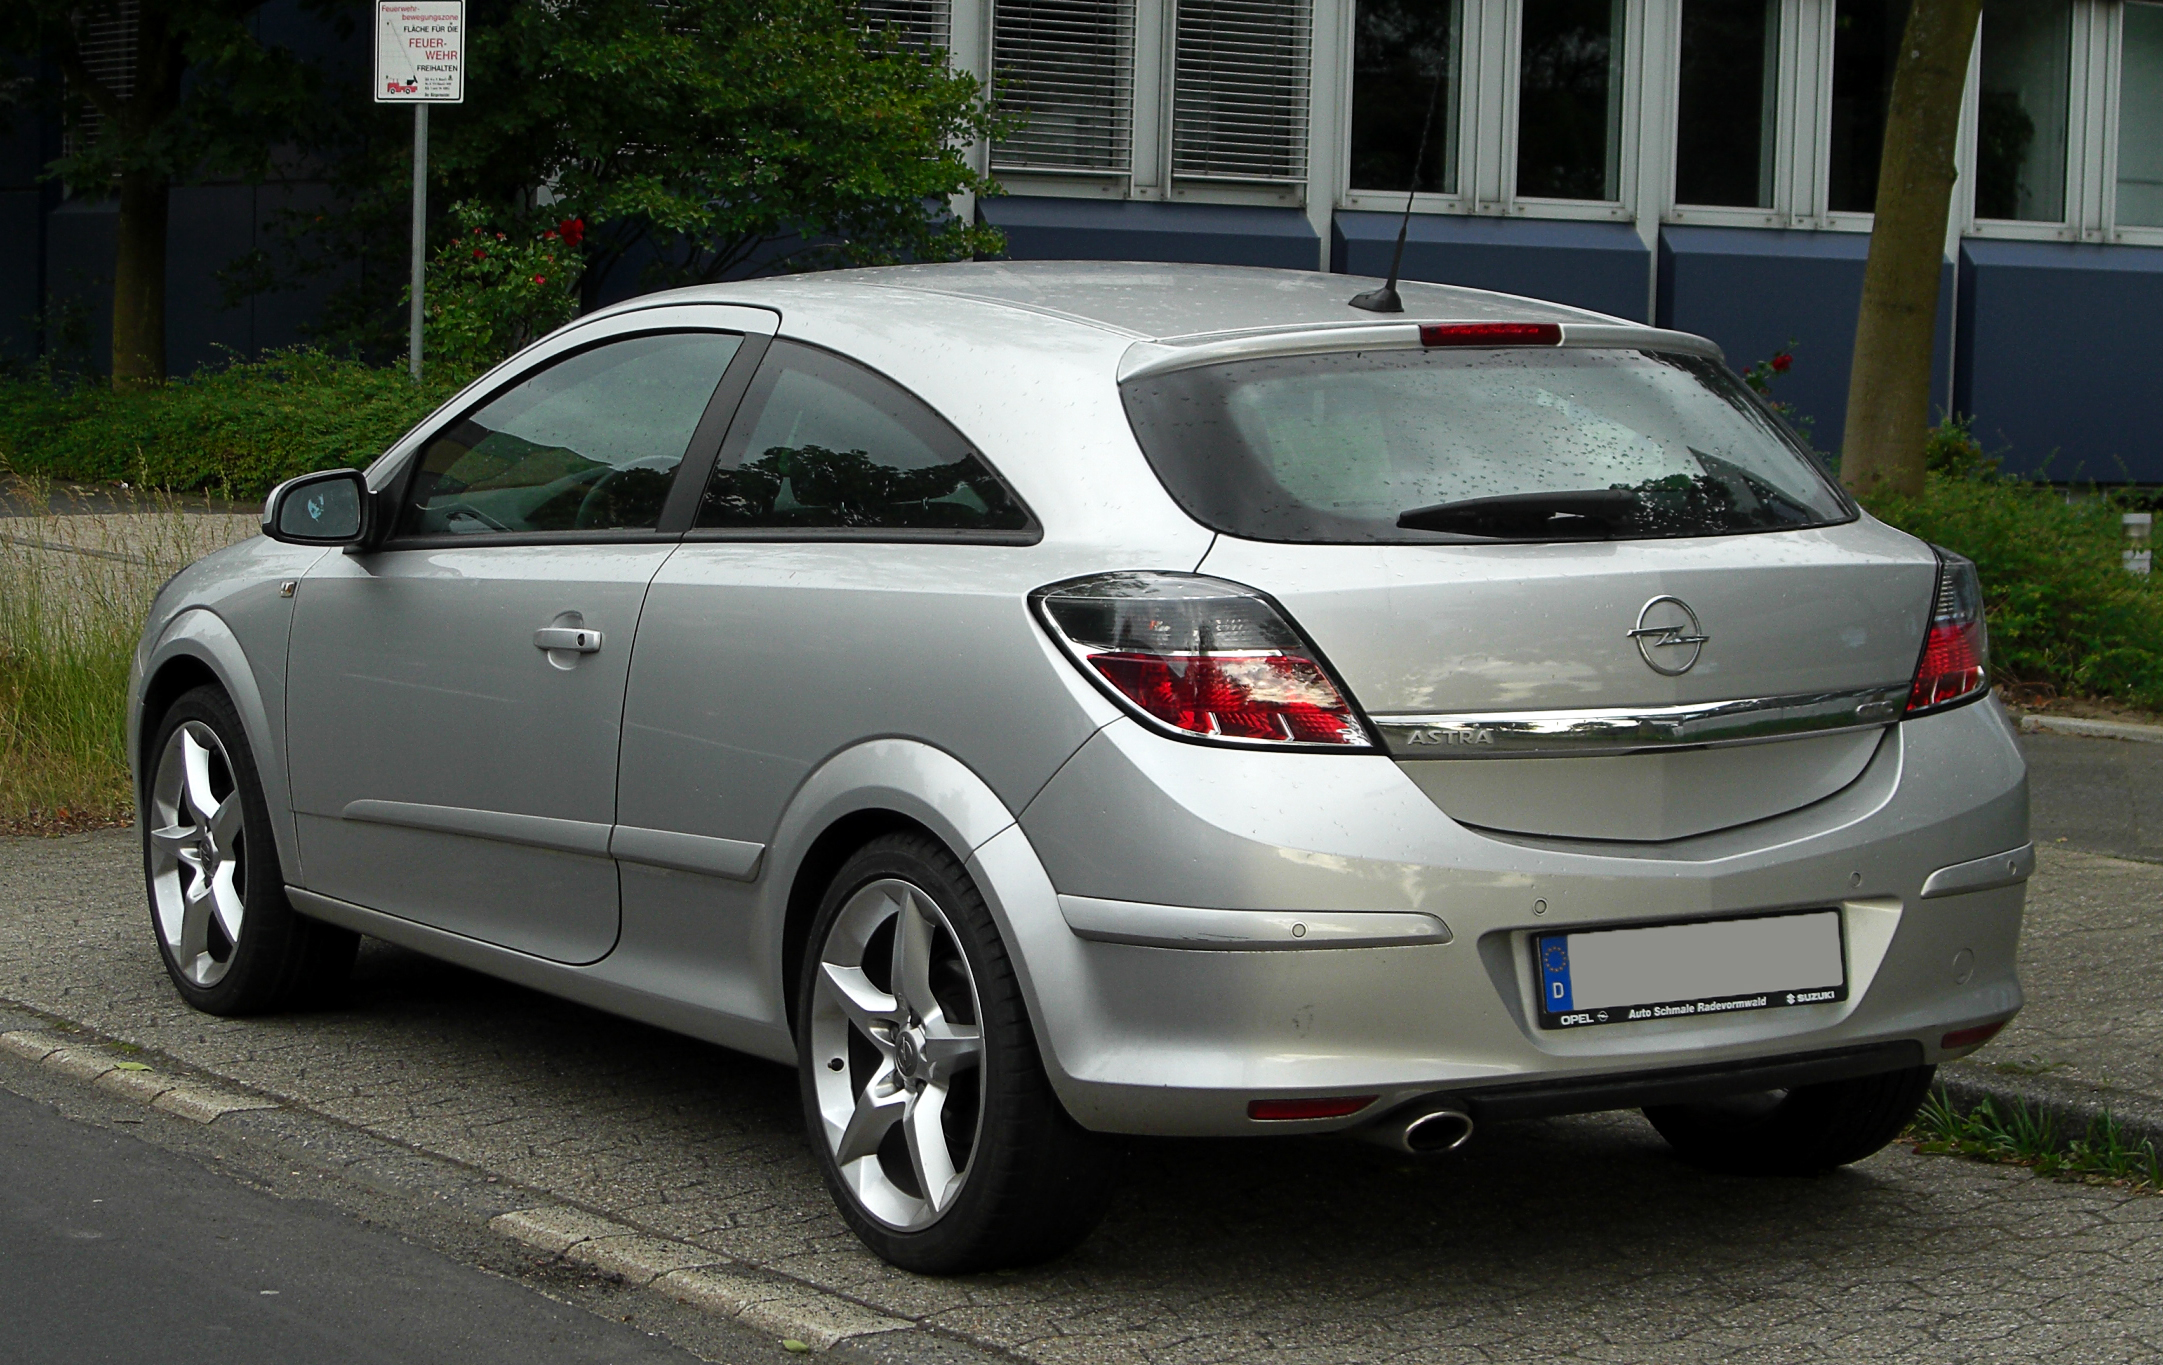 Opel Astra H GTC Photos and Specs. Photo: Opel Astra H GTC